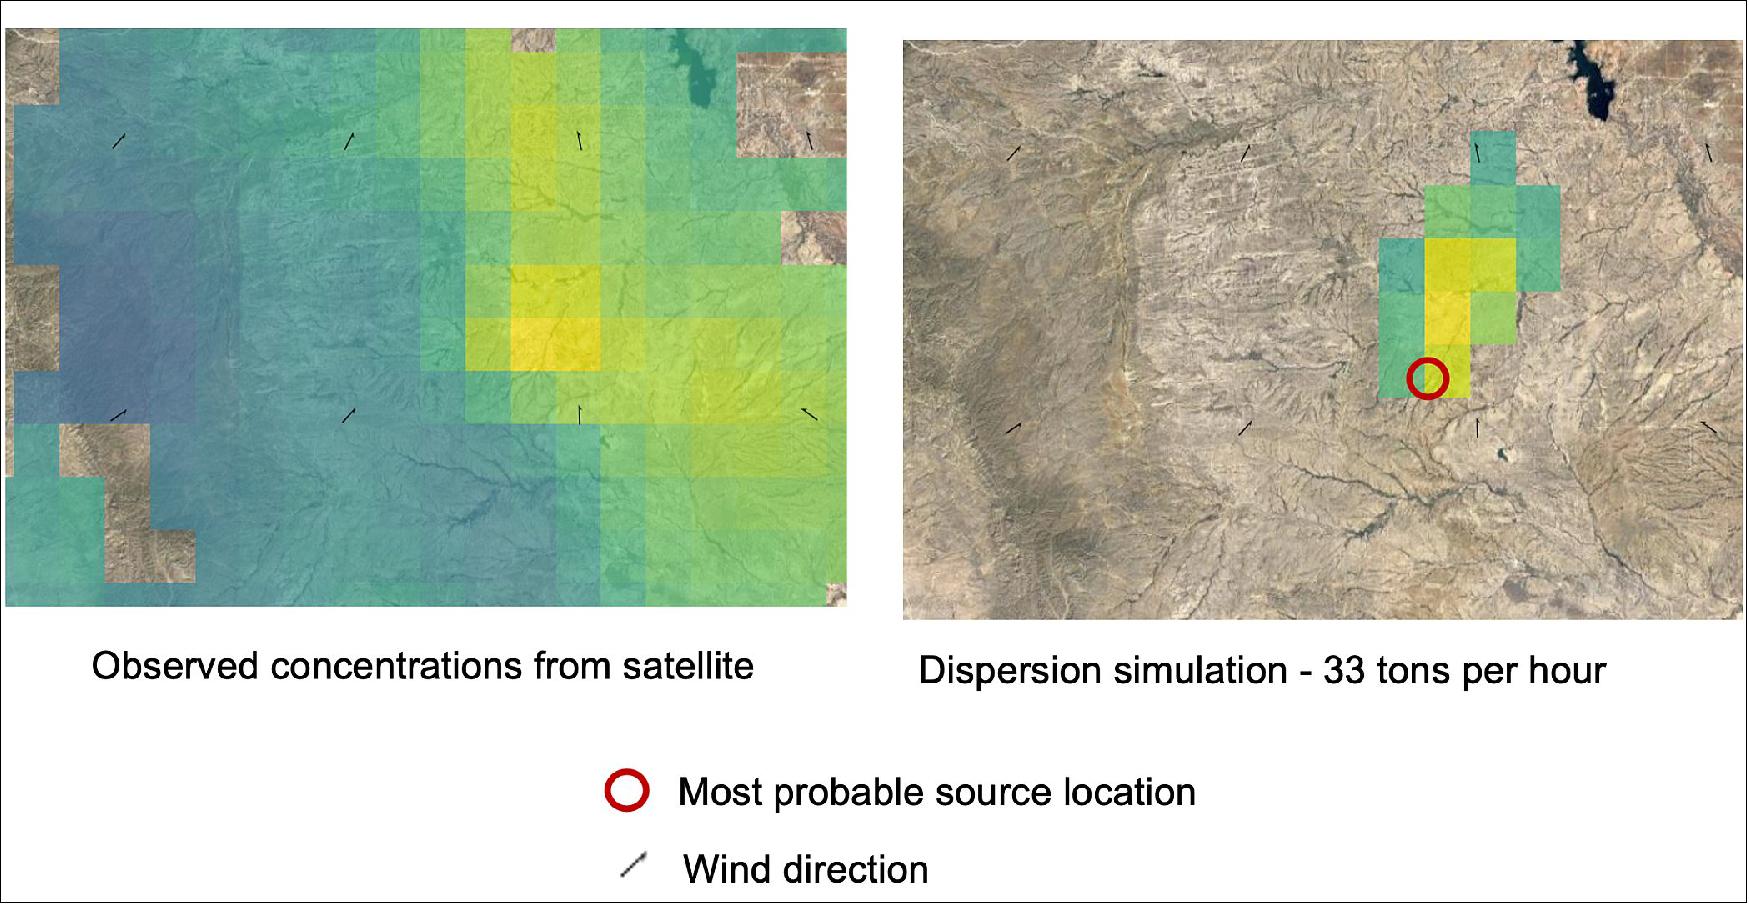 Figure 71: In December 2019, Kayrros detected a methane plume over the Permian Basin in the US using data from the Copernicus Sentinel-5P satellite. The Permian Basin is a shale play – an oil and gas region with a high density of wells – meaning there were hundreds of potential sources of the leak. Kayrros therefore used data from the Copernicus Sentinel-2 and Sentinel-1 missions to look into which wells had completed operations within three months of the leak – a factor that would significantly narrow down the potential suspects. The result was that only one operator was in this category. - The example of the Permian Basin shows how the use of the Copernicus Sentinel satellites, in combination with Kayrros's technology, can be used to narrow down the source of a methane leak. Whilst Sentinel-5P allowed the initial detection, it was only through the use of Sentinel-2 and Sentinel-1 that the final source could be identified (image credit: Kayrros)